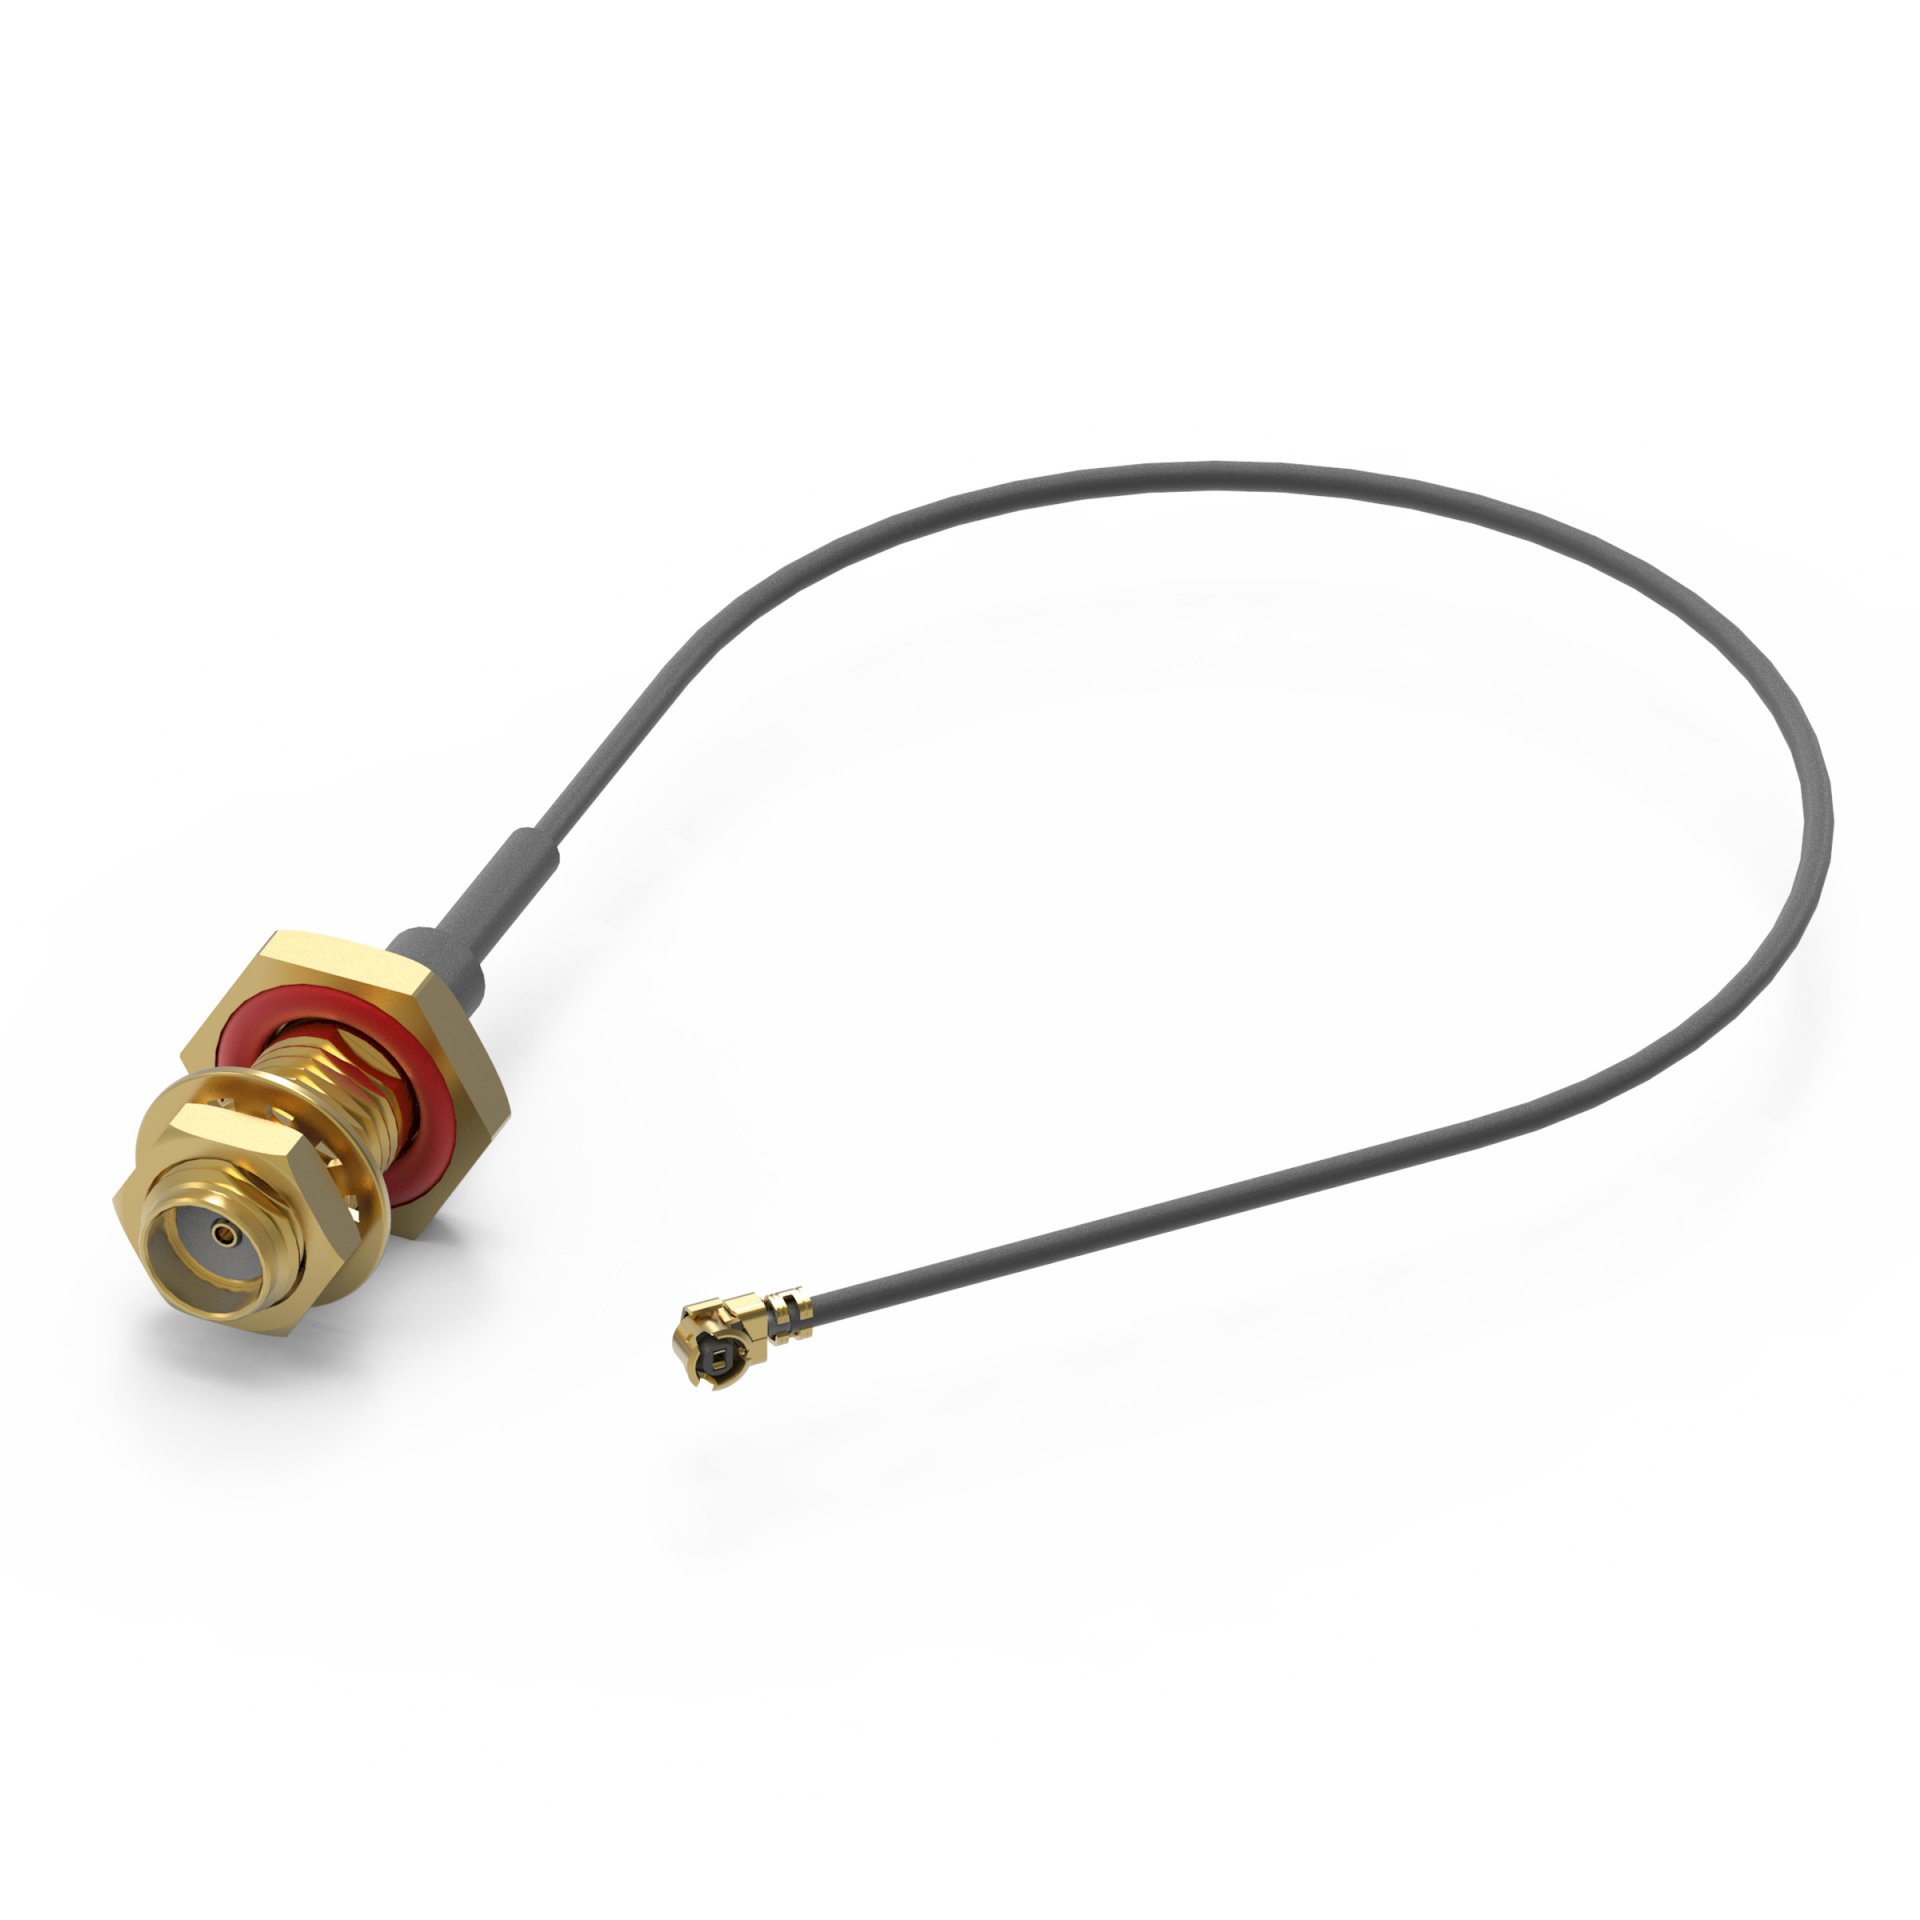 New range of coaxial connectors with an Ultra-Miniature RF Coaxial Connector from Würth Elektronik